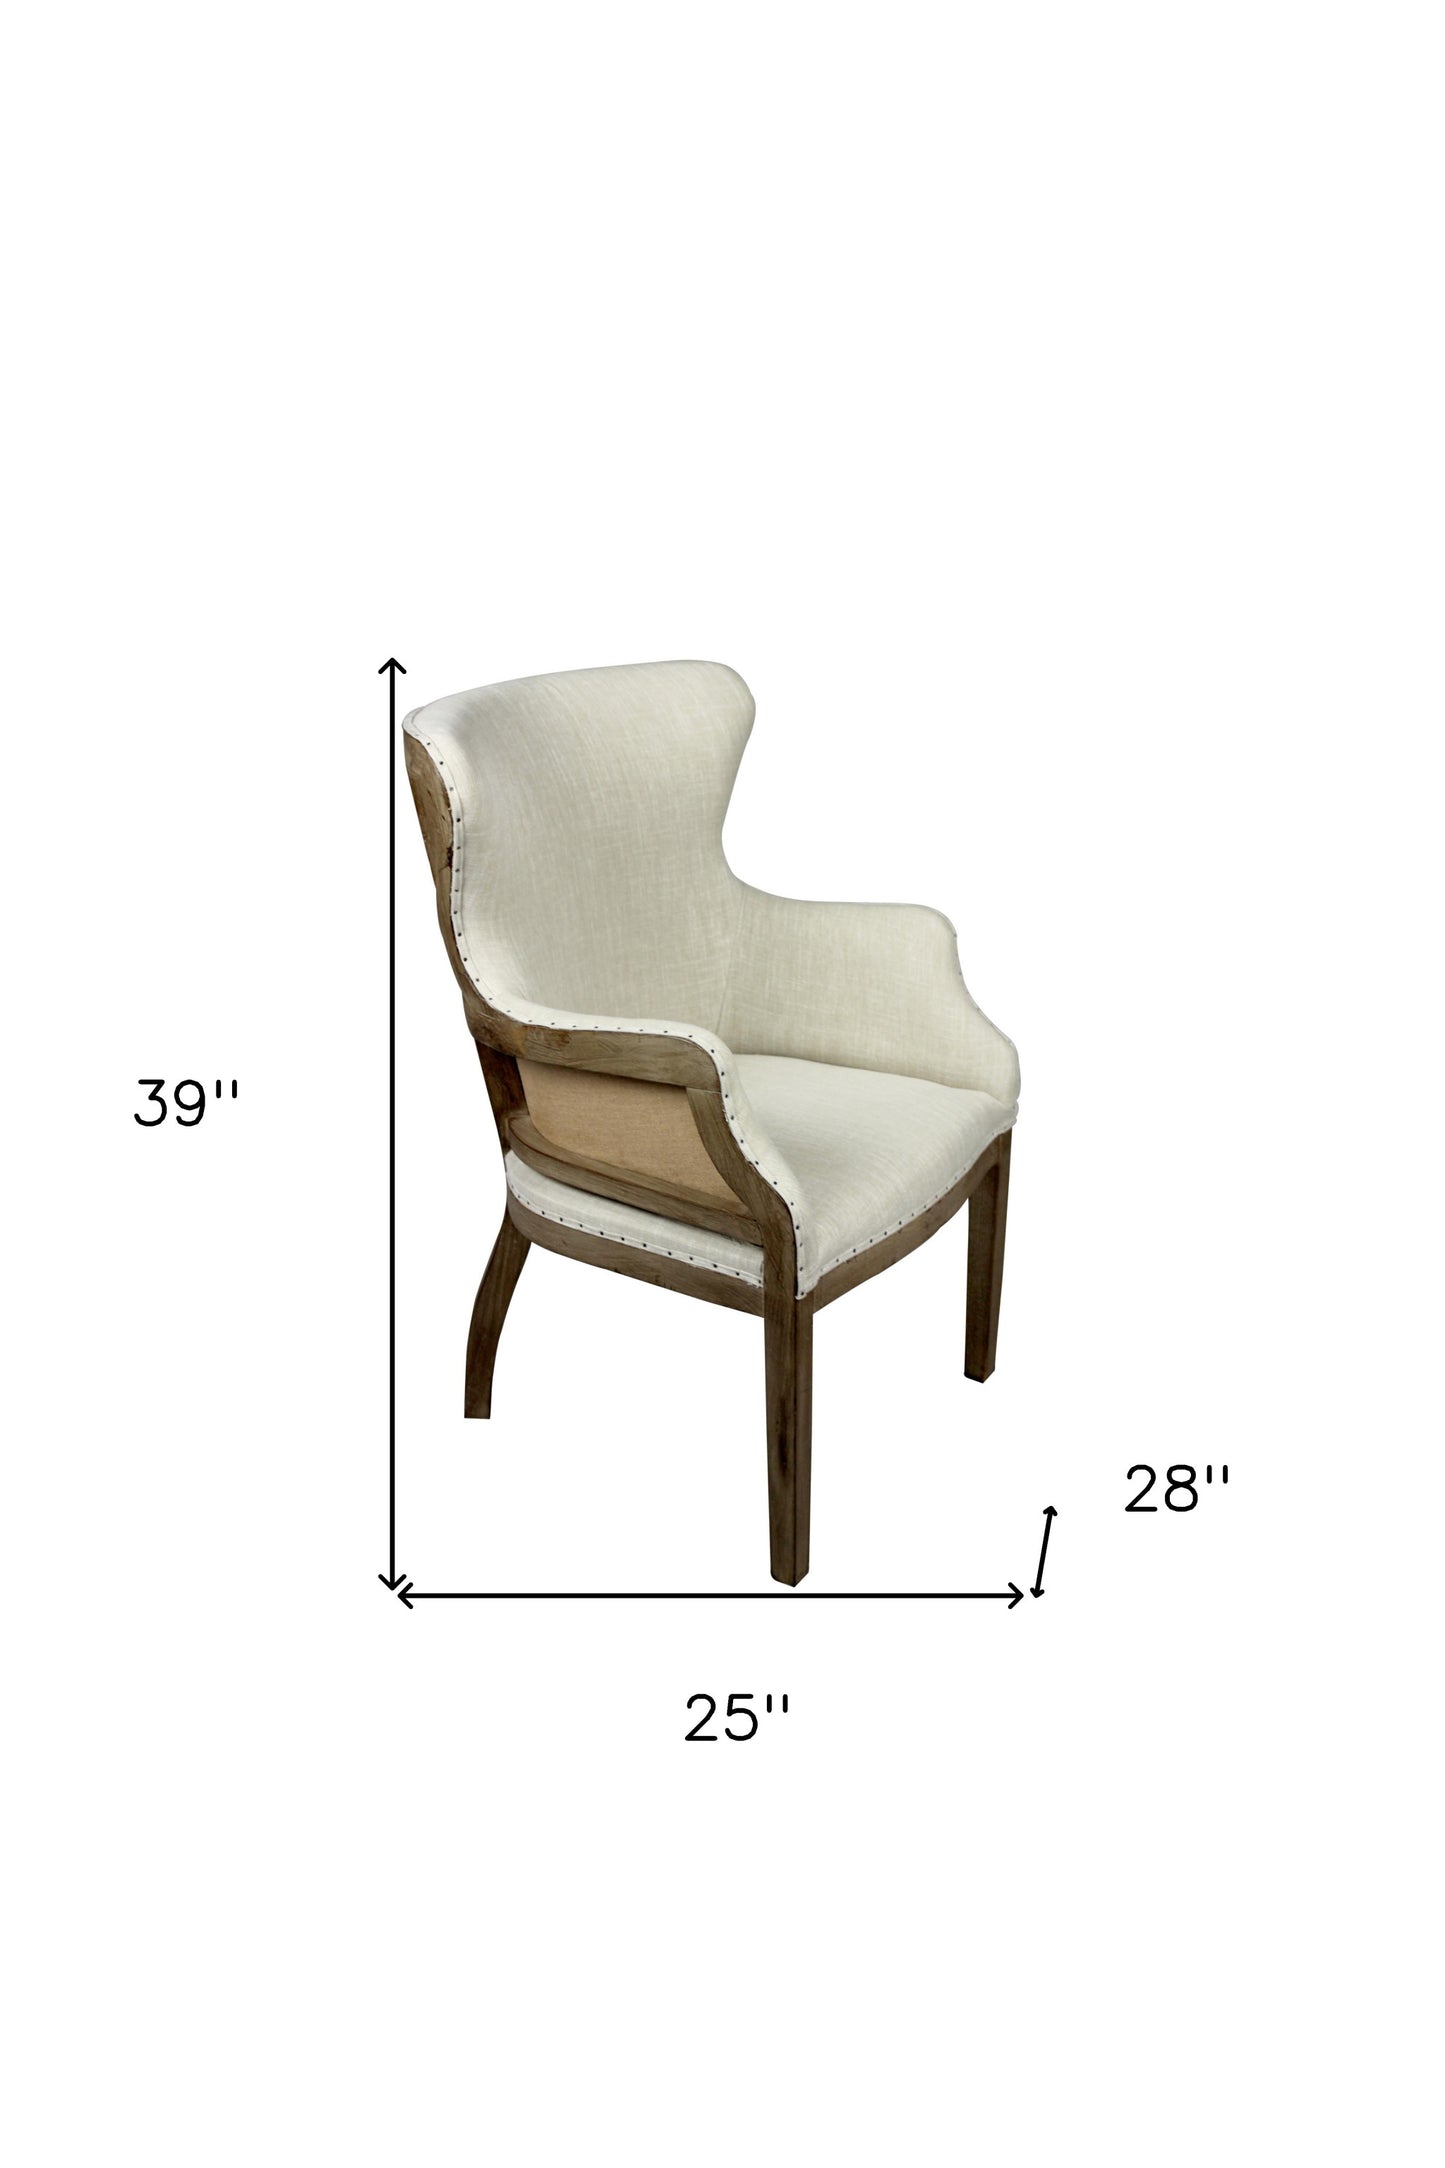 25" Natural Polyester Blend Solid Color Arm Chair By Homeroots